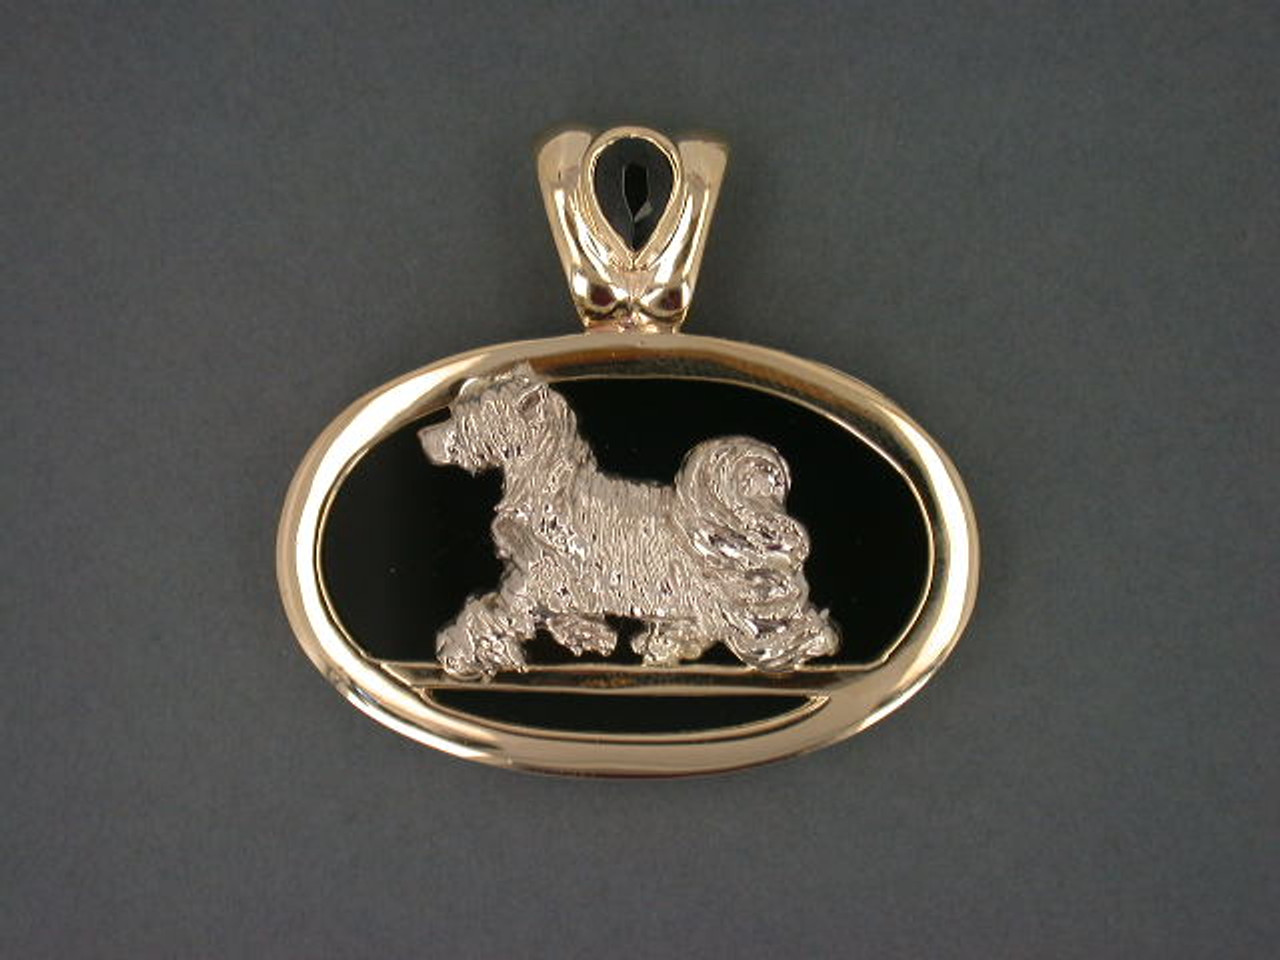 Chinese Crested Full Body Gaiting Powder Puff L Pendant